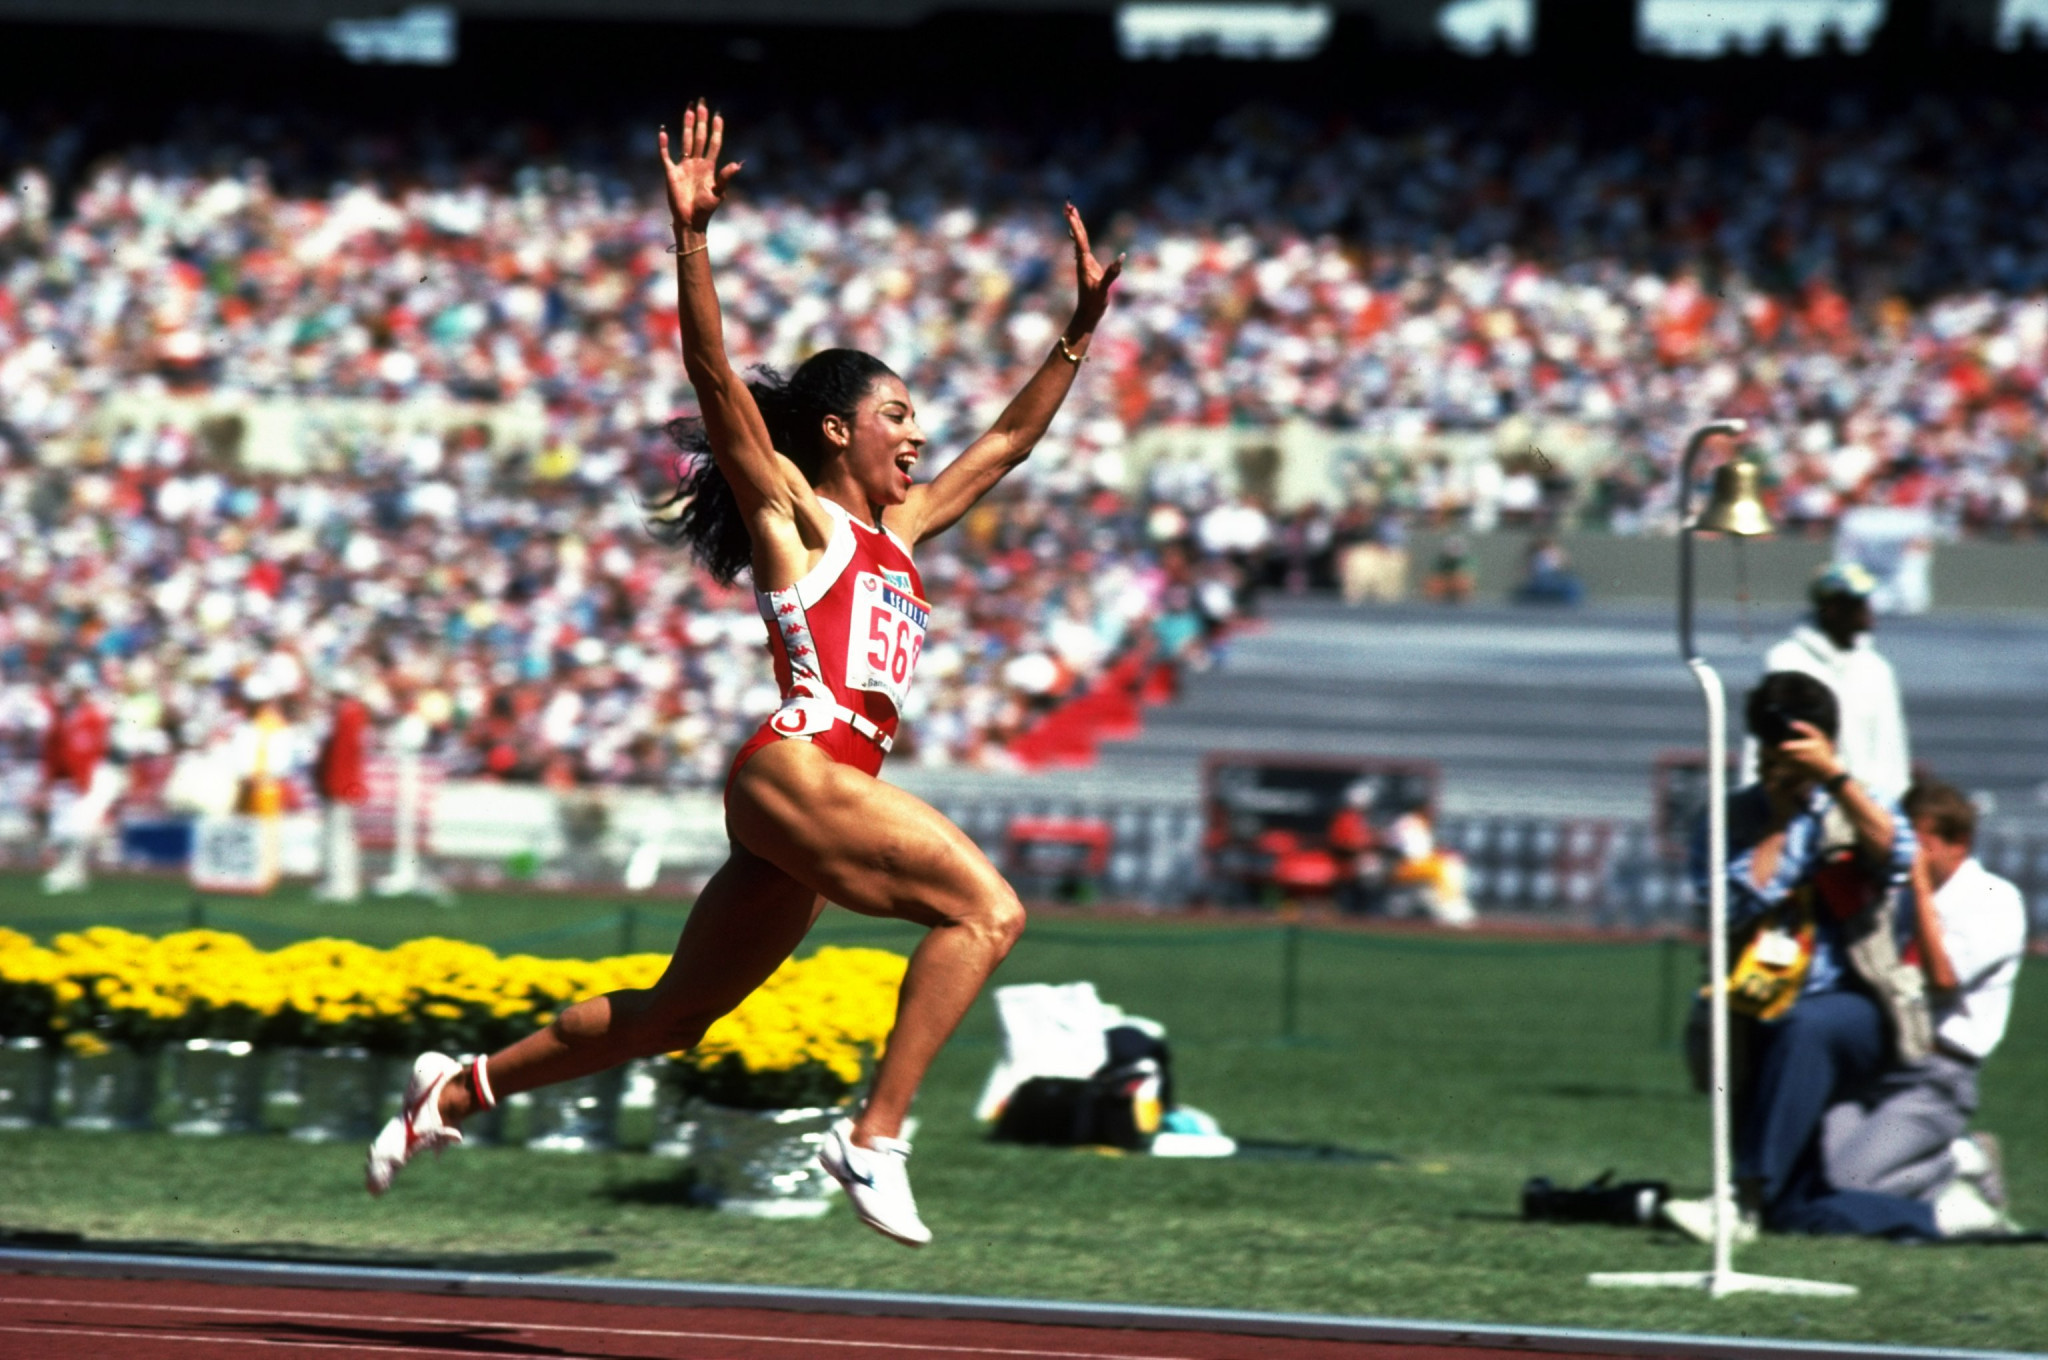 Florence Griffith Joyner won three gold medals at Seoul 1988, including the 100m and 200m, the latter in a world record that still stands today, but her performances are viewed with suspicion ©Getty Images